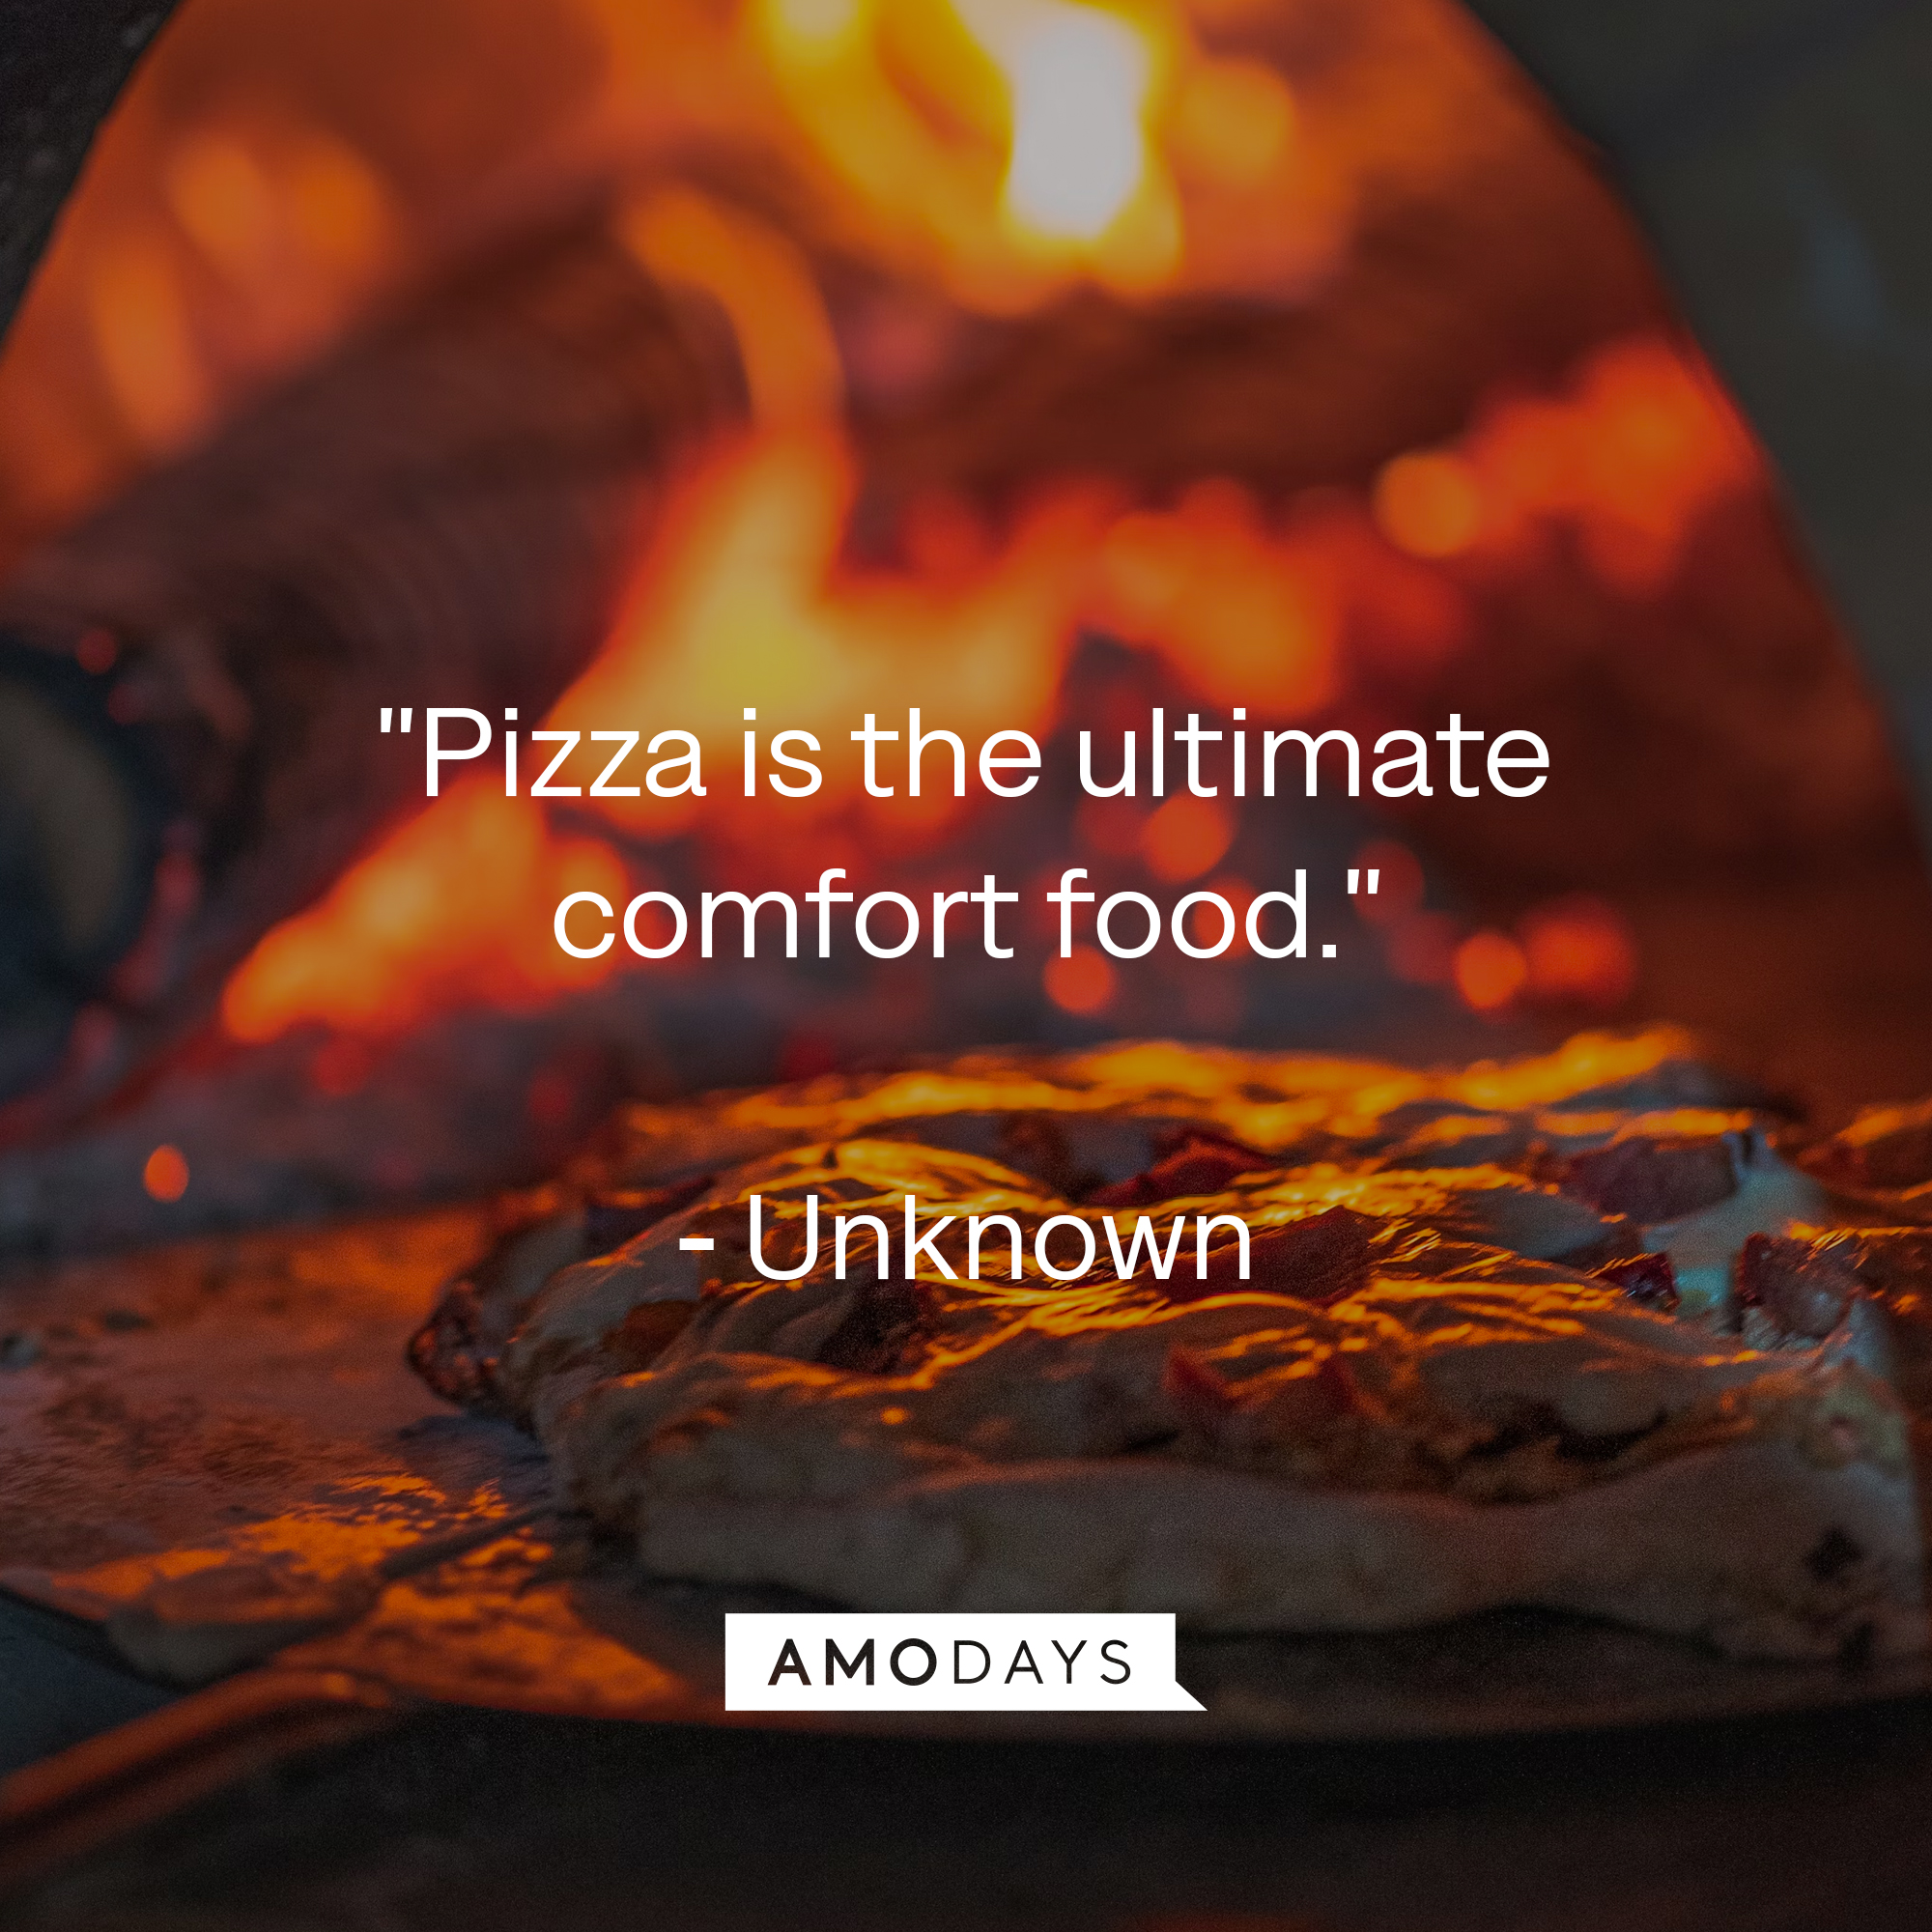 Unknown's quote: "Pizza is the ultimate comfort food." Source: Toasttab